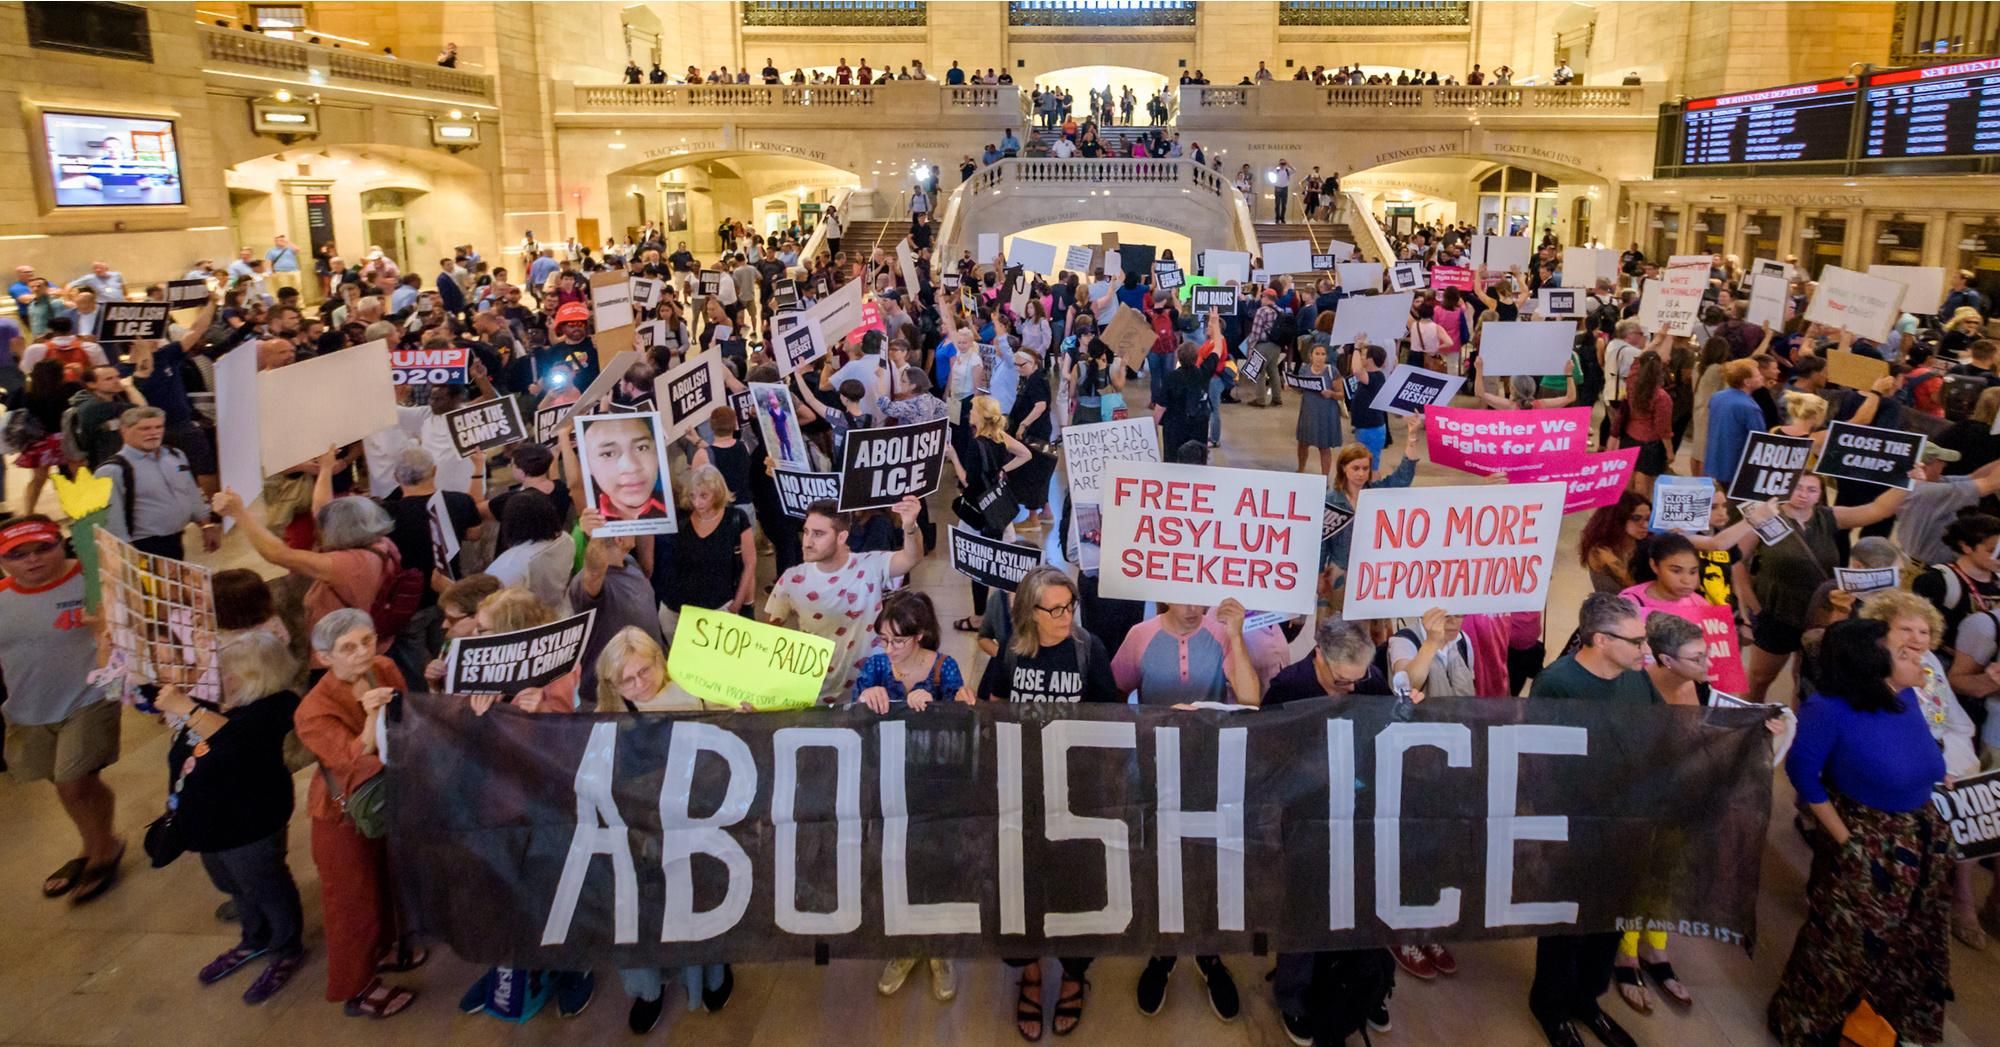 Activists participate in an "Abolish ICE" protest against the Trump administration's anti-immigrant policies in New York City's Grand Central Station on August 29, 2019. (Photo: Erik McGregor/LightRocket via Getty Images) 